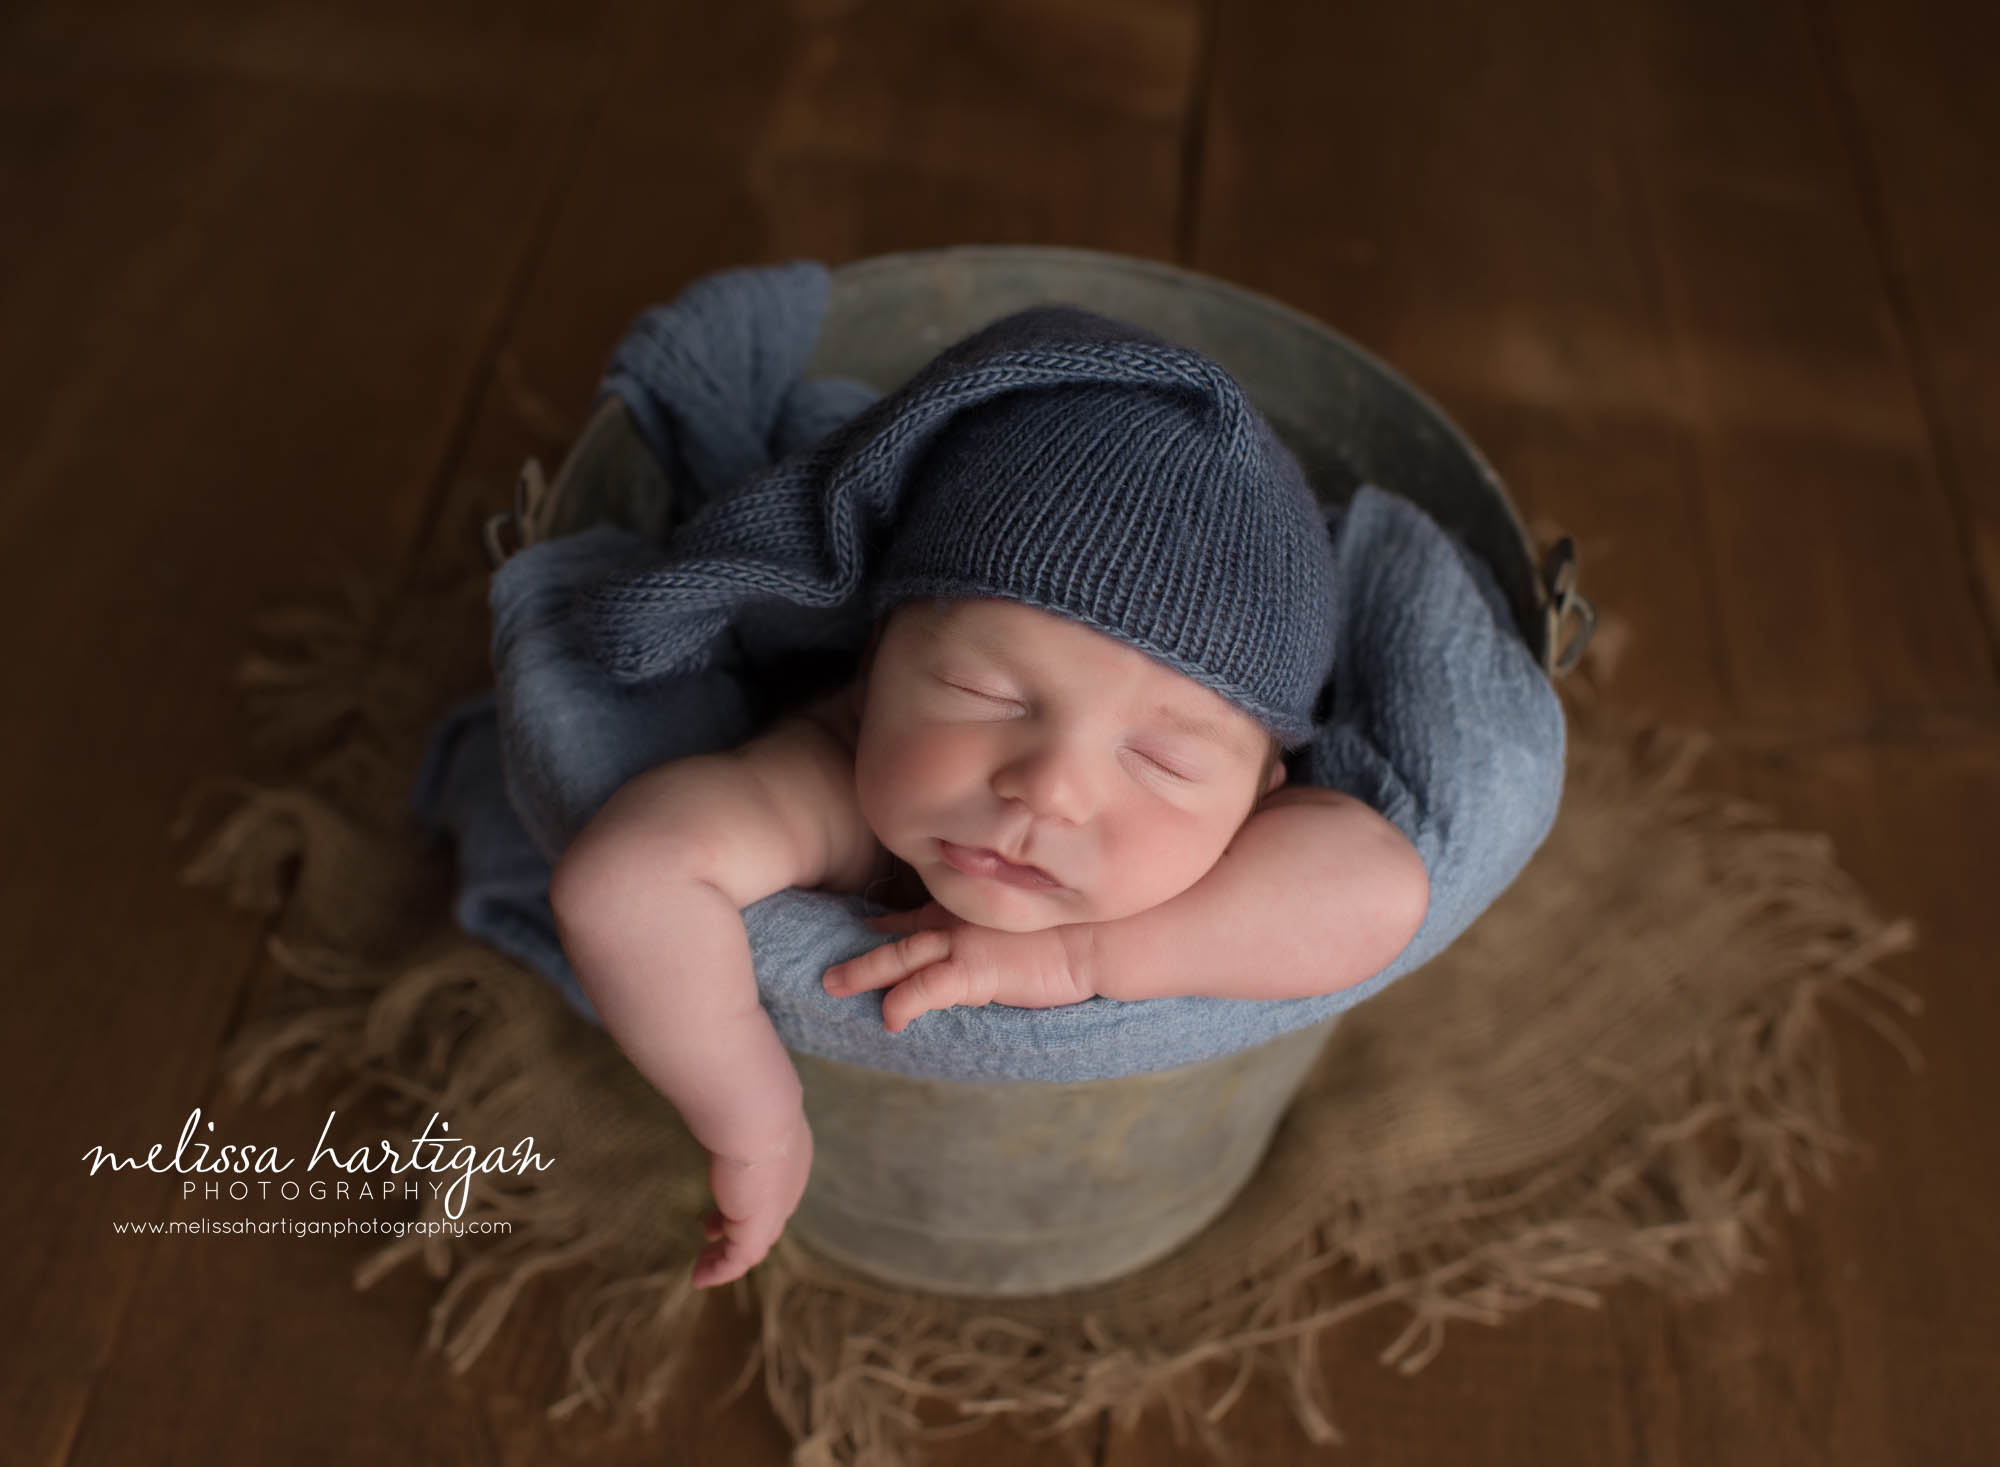 newborn boy posed in bucket with arm handing out sleeping blue knitted sleepy cap on